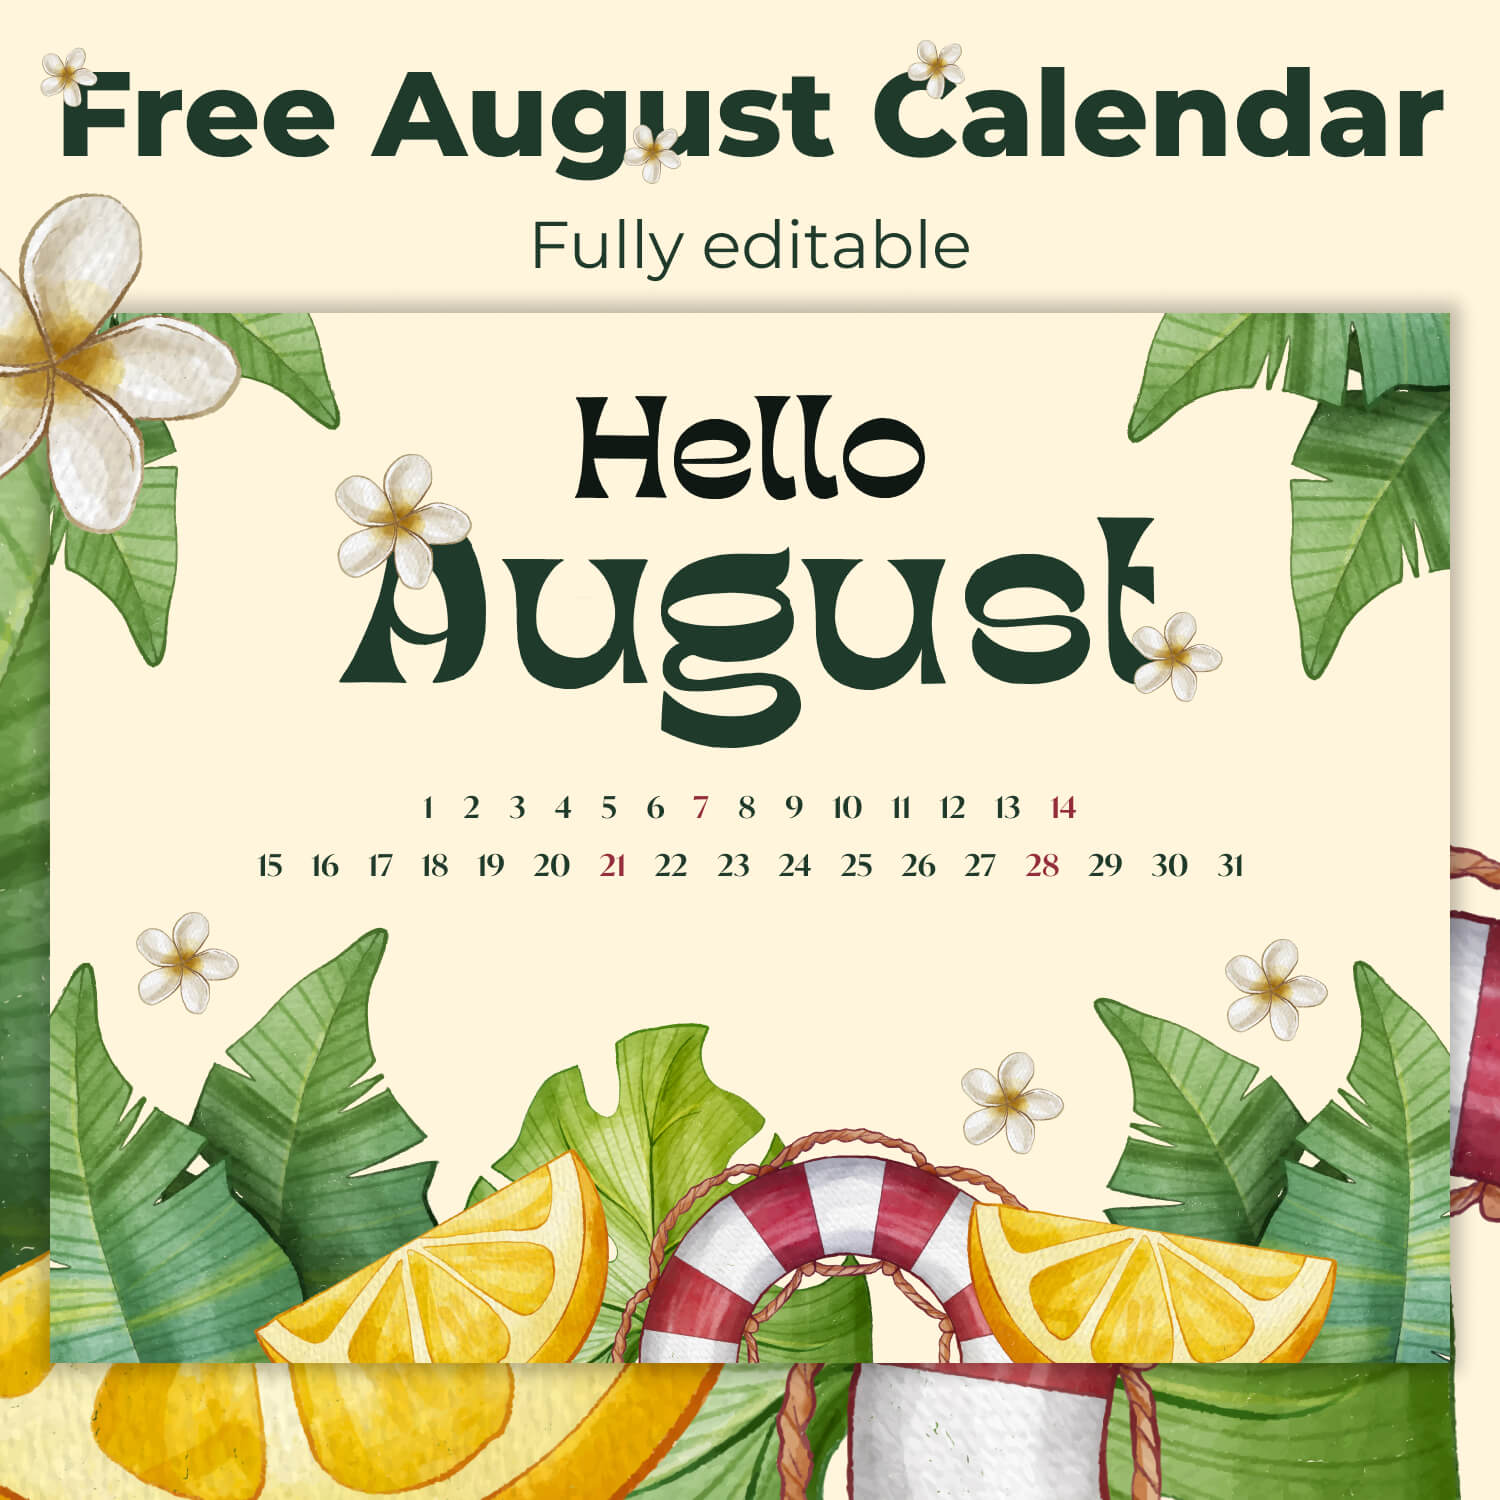 Free Printable August Calendar Cover Image.